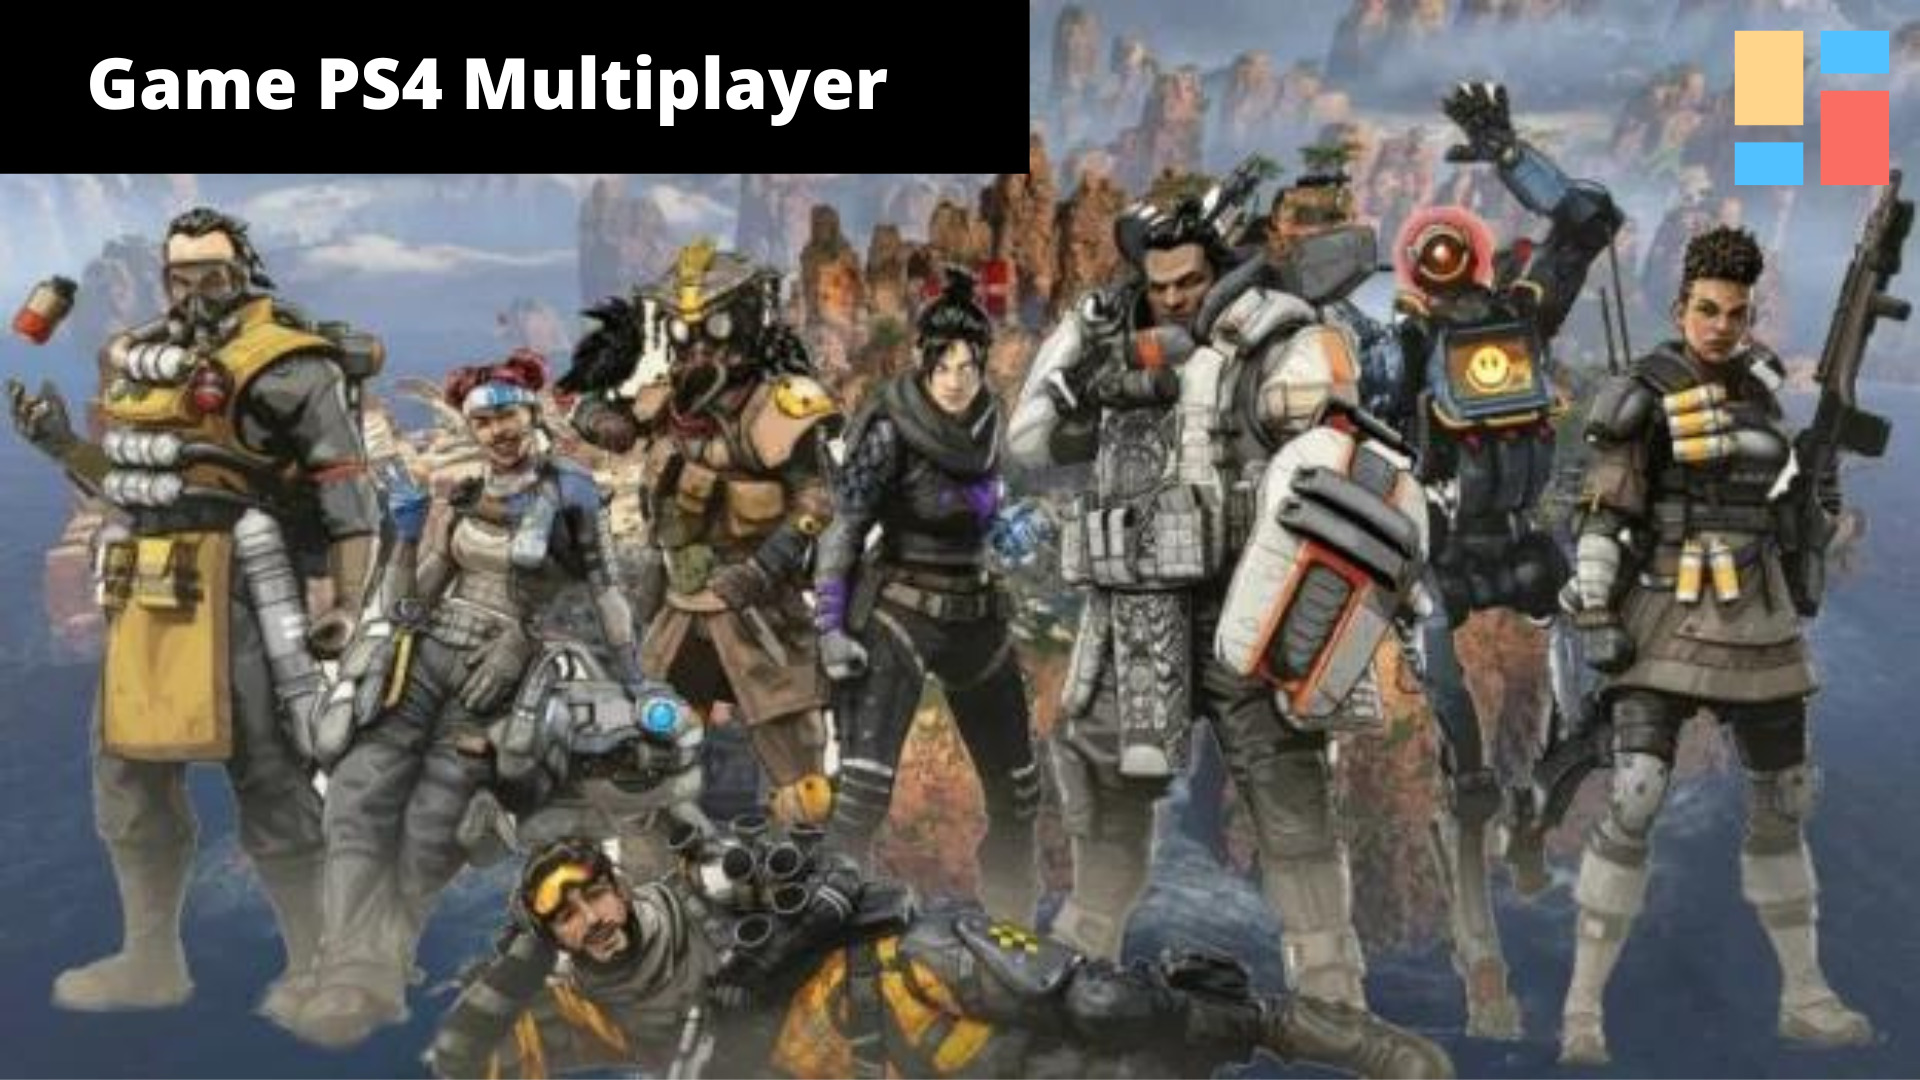 Game PS4 Multiplayer